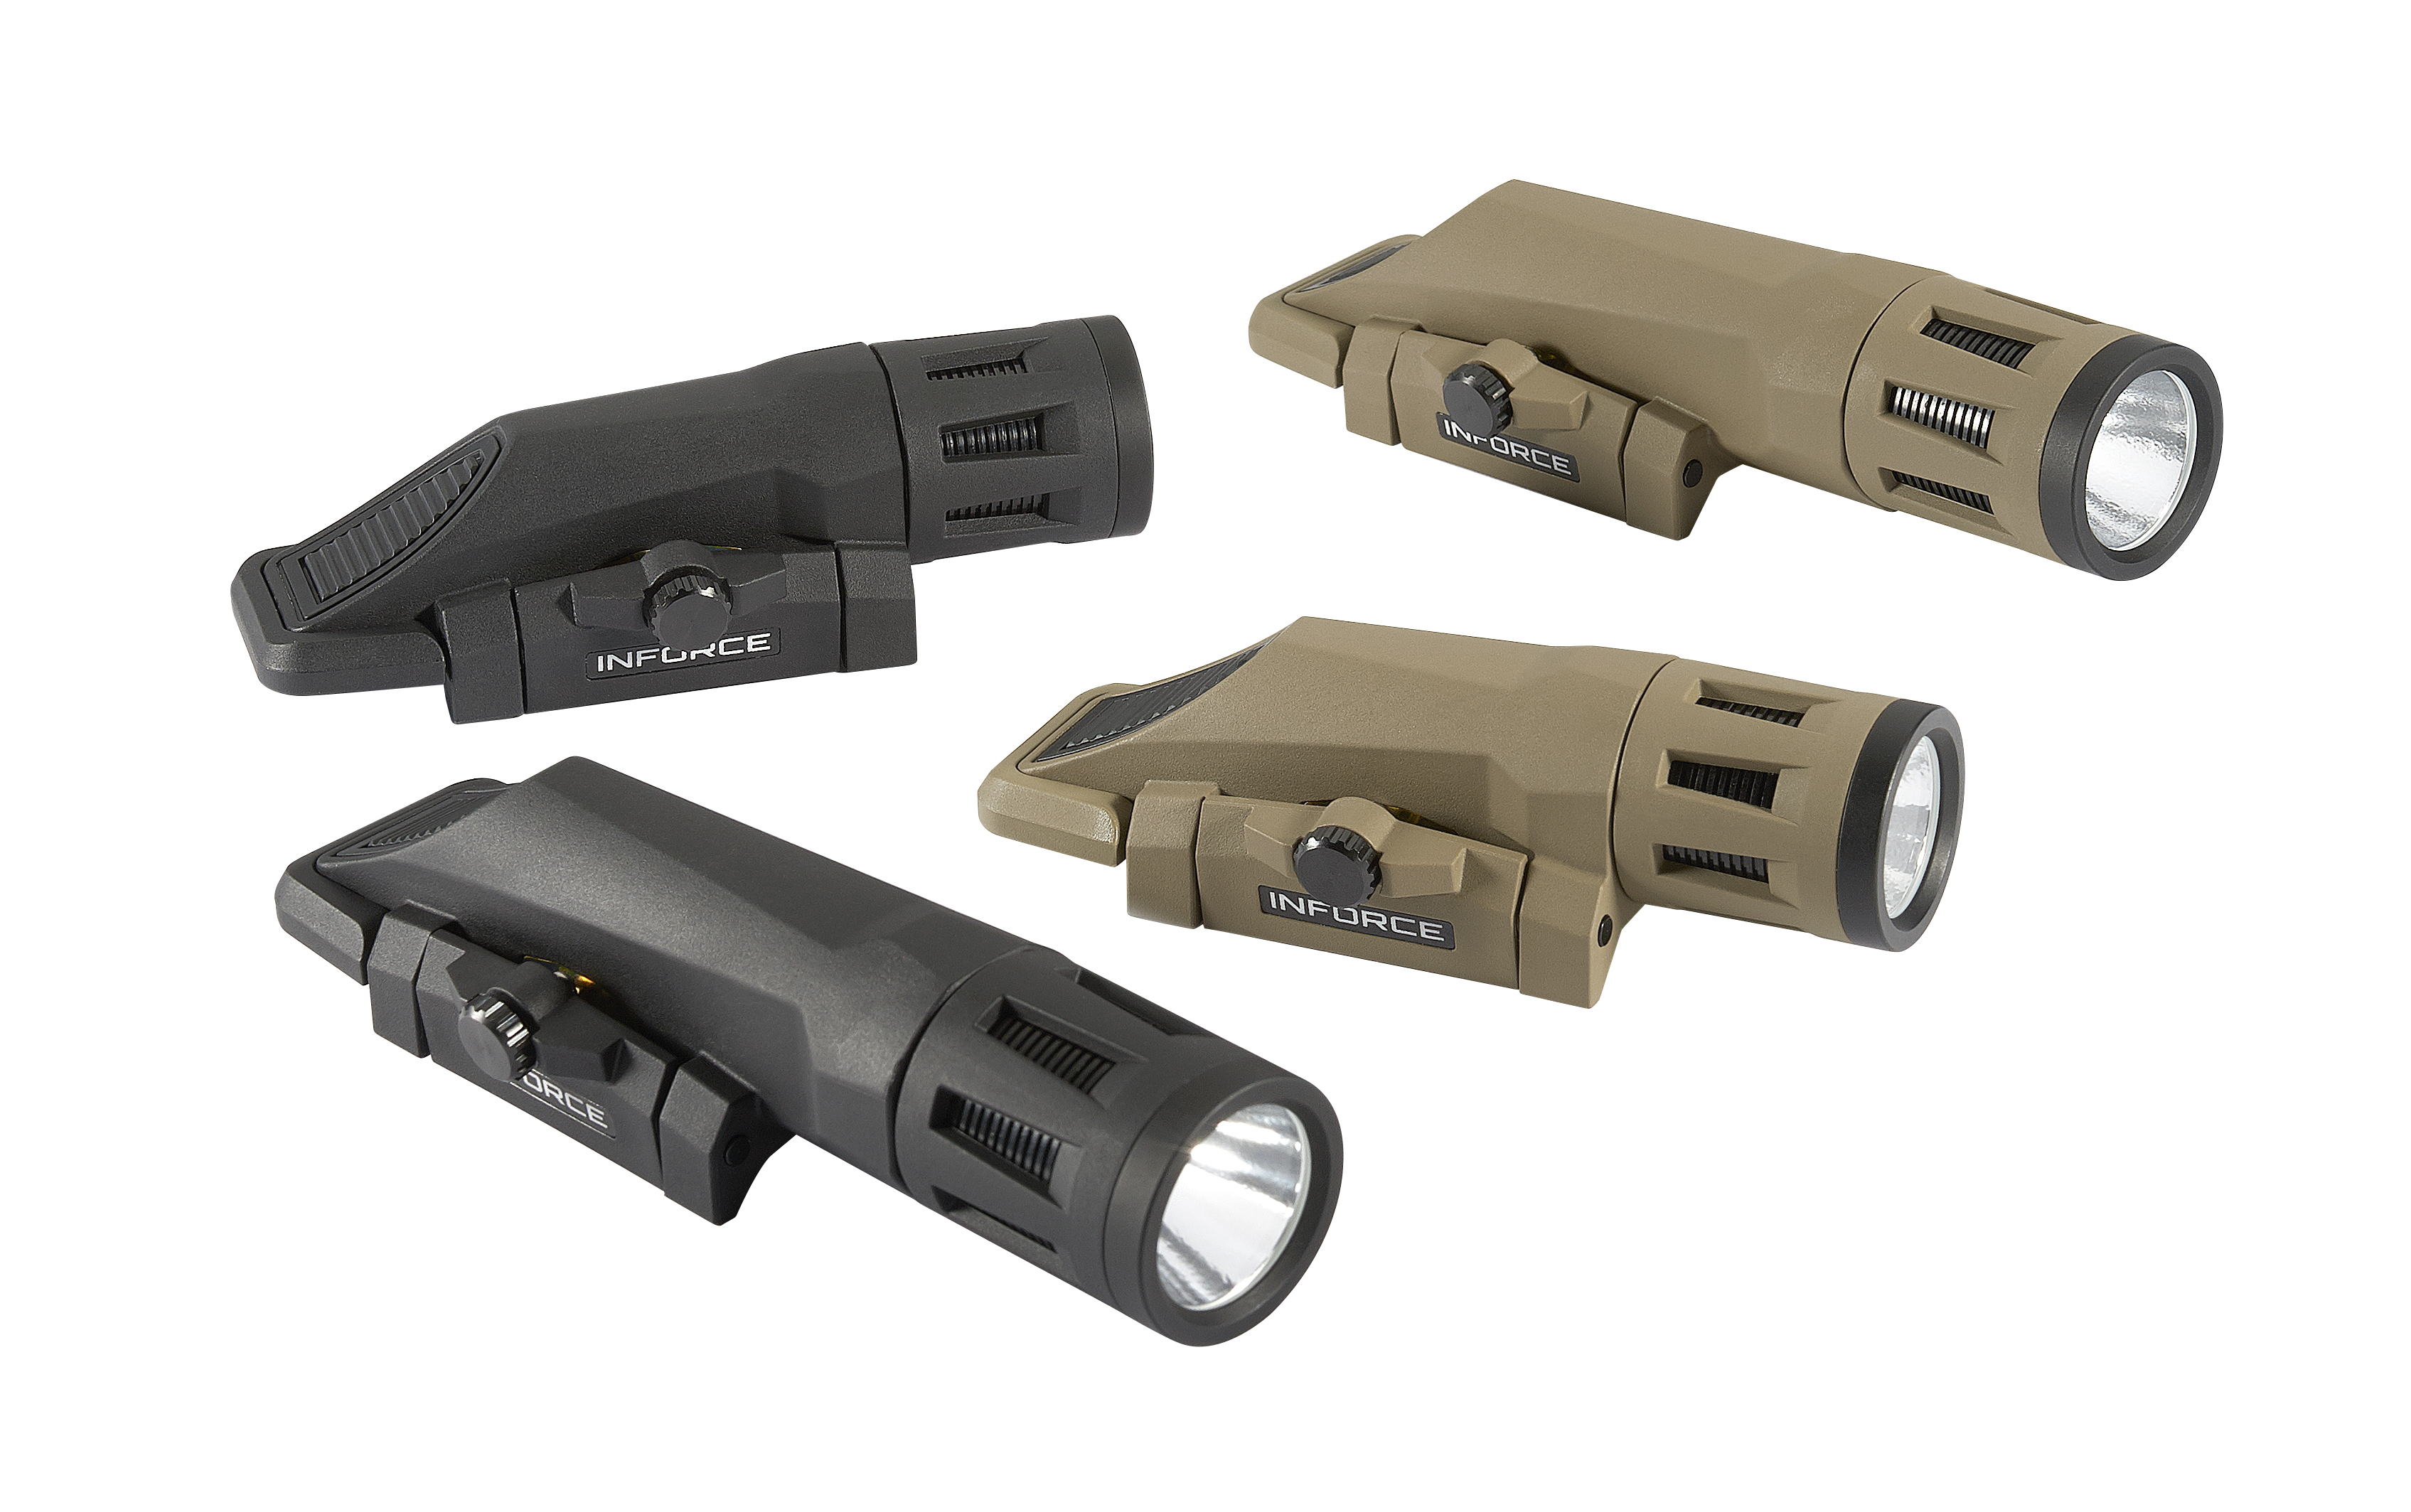 InForce – New Gen2 Weapon Mounted Lights Introduced - Soldier